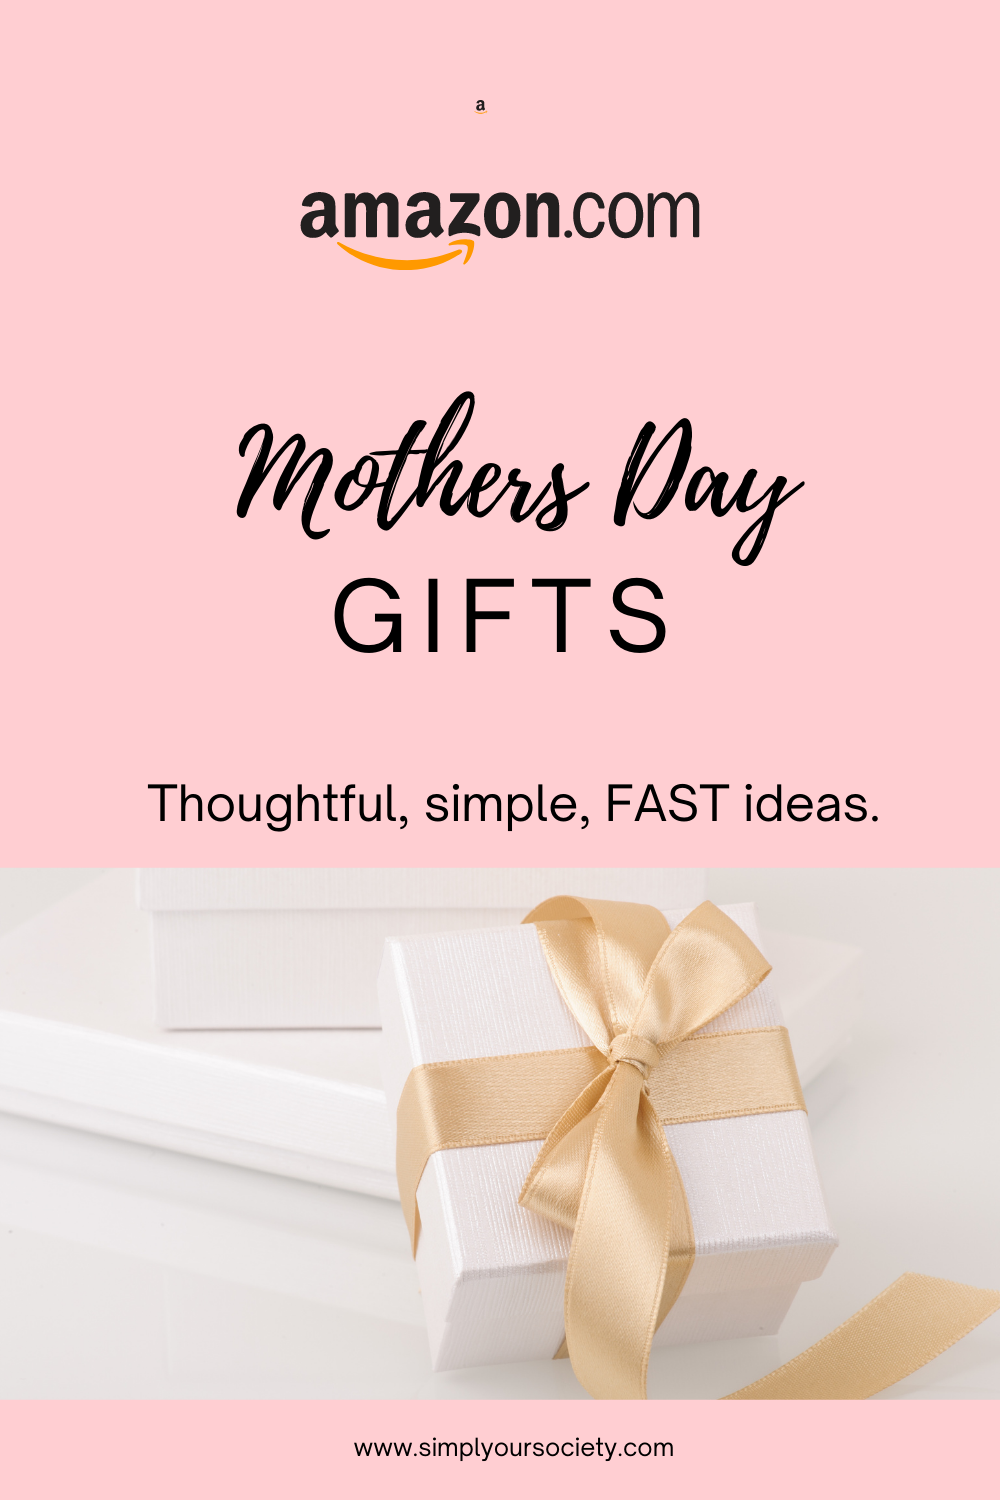 pretty pink with white gift and gold ribbon pinterest pin 5 amazon mothers day gifts, mothers day quotes, mothers day gifts, happy mothers day, mother day 2021, mothers day date